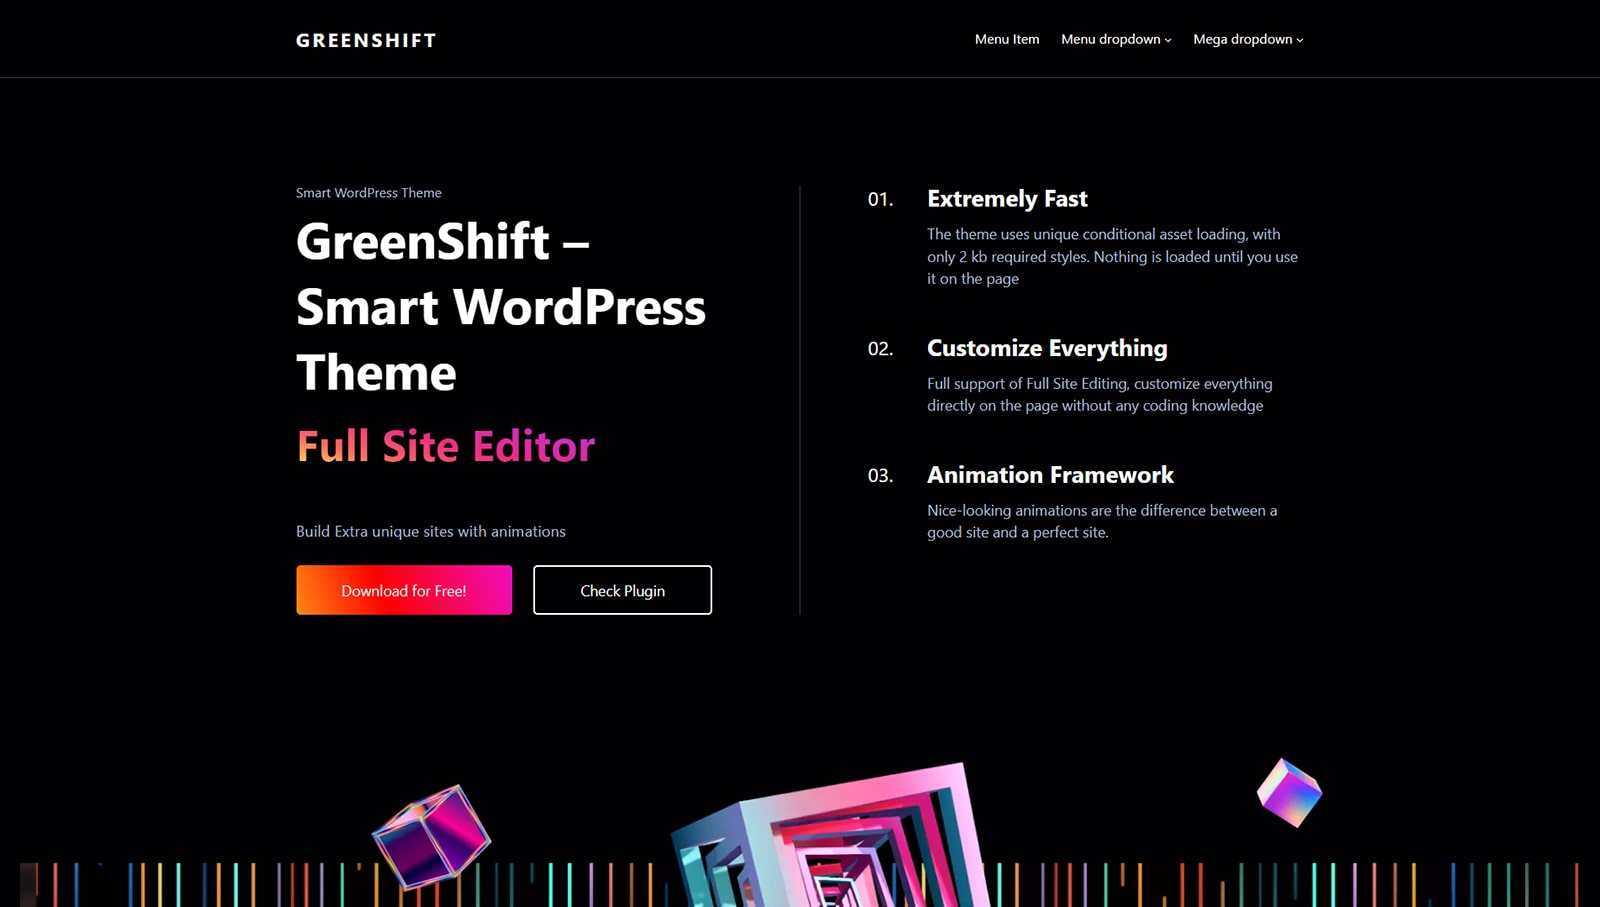 Rendering of Greenshift, a fast-loading WordPress theme for the FSE experience.